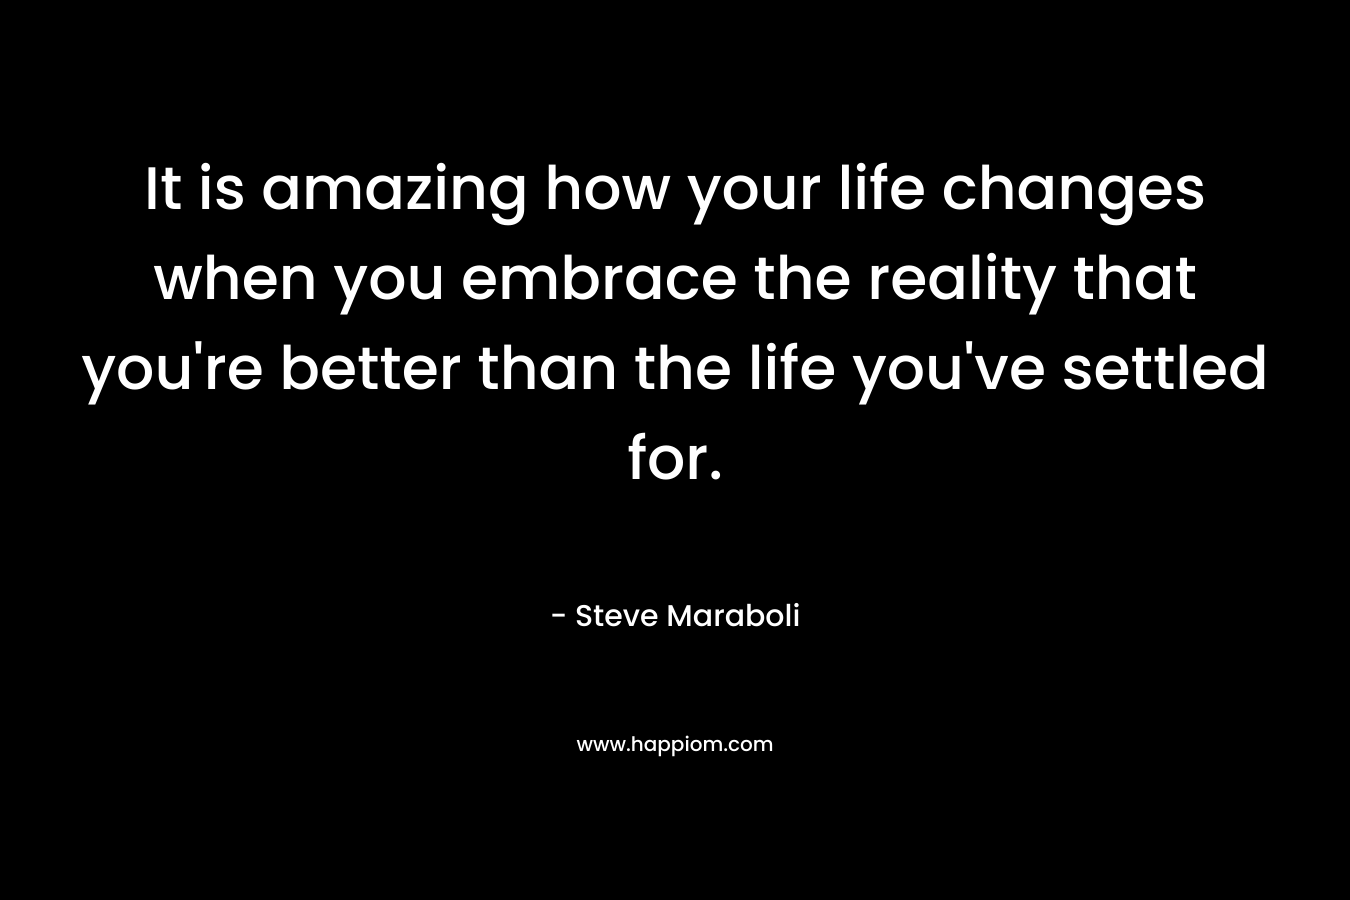 It is amazing how your life changes when you embrace the reality that you're better than the life you've settled for.